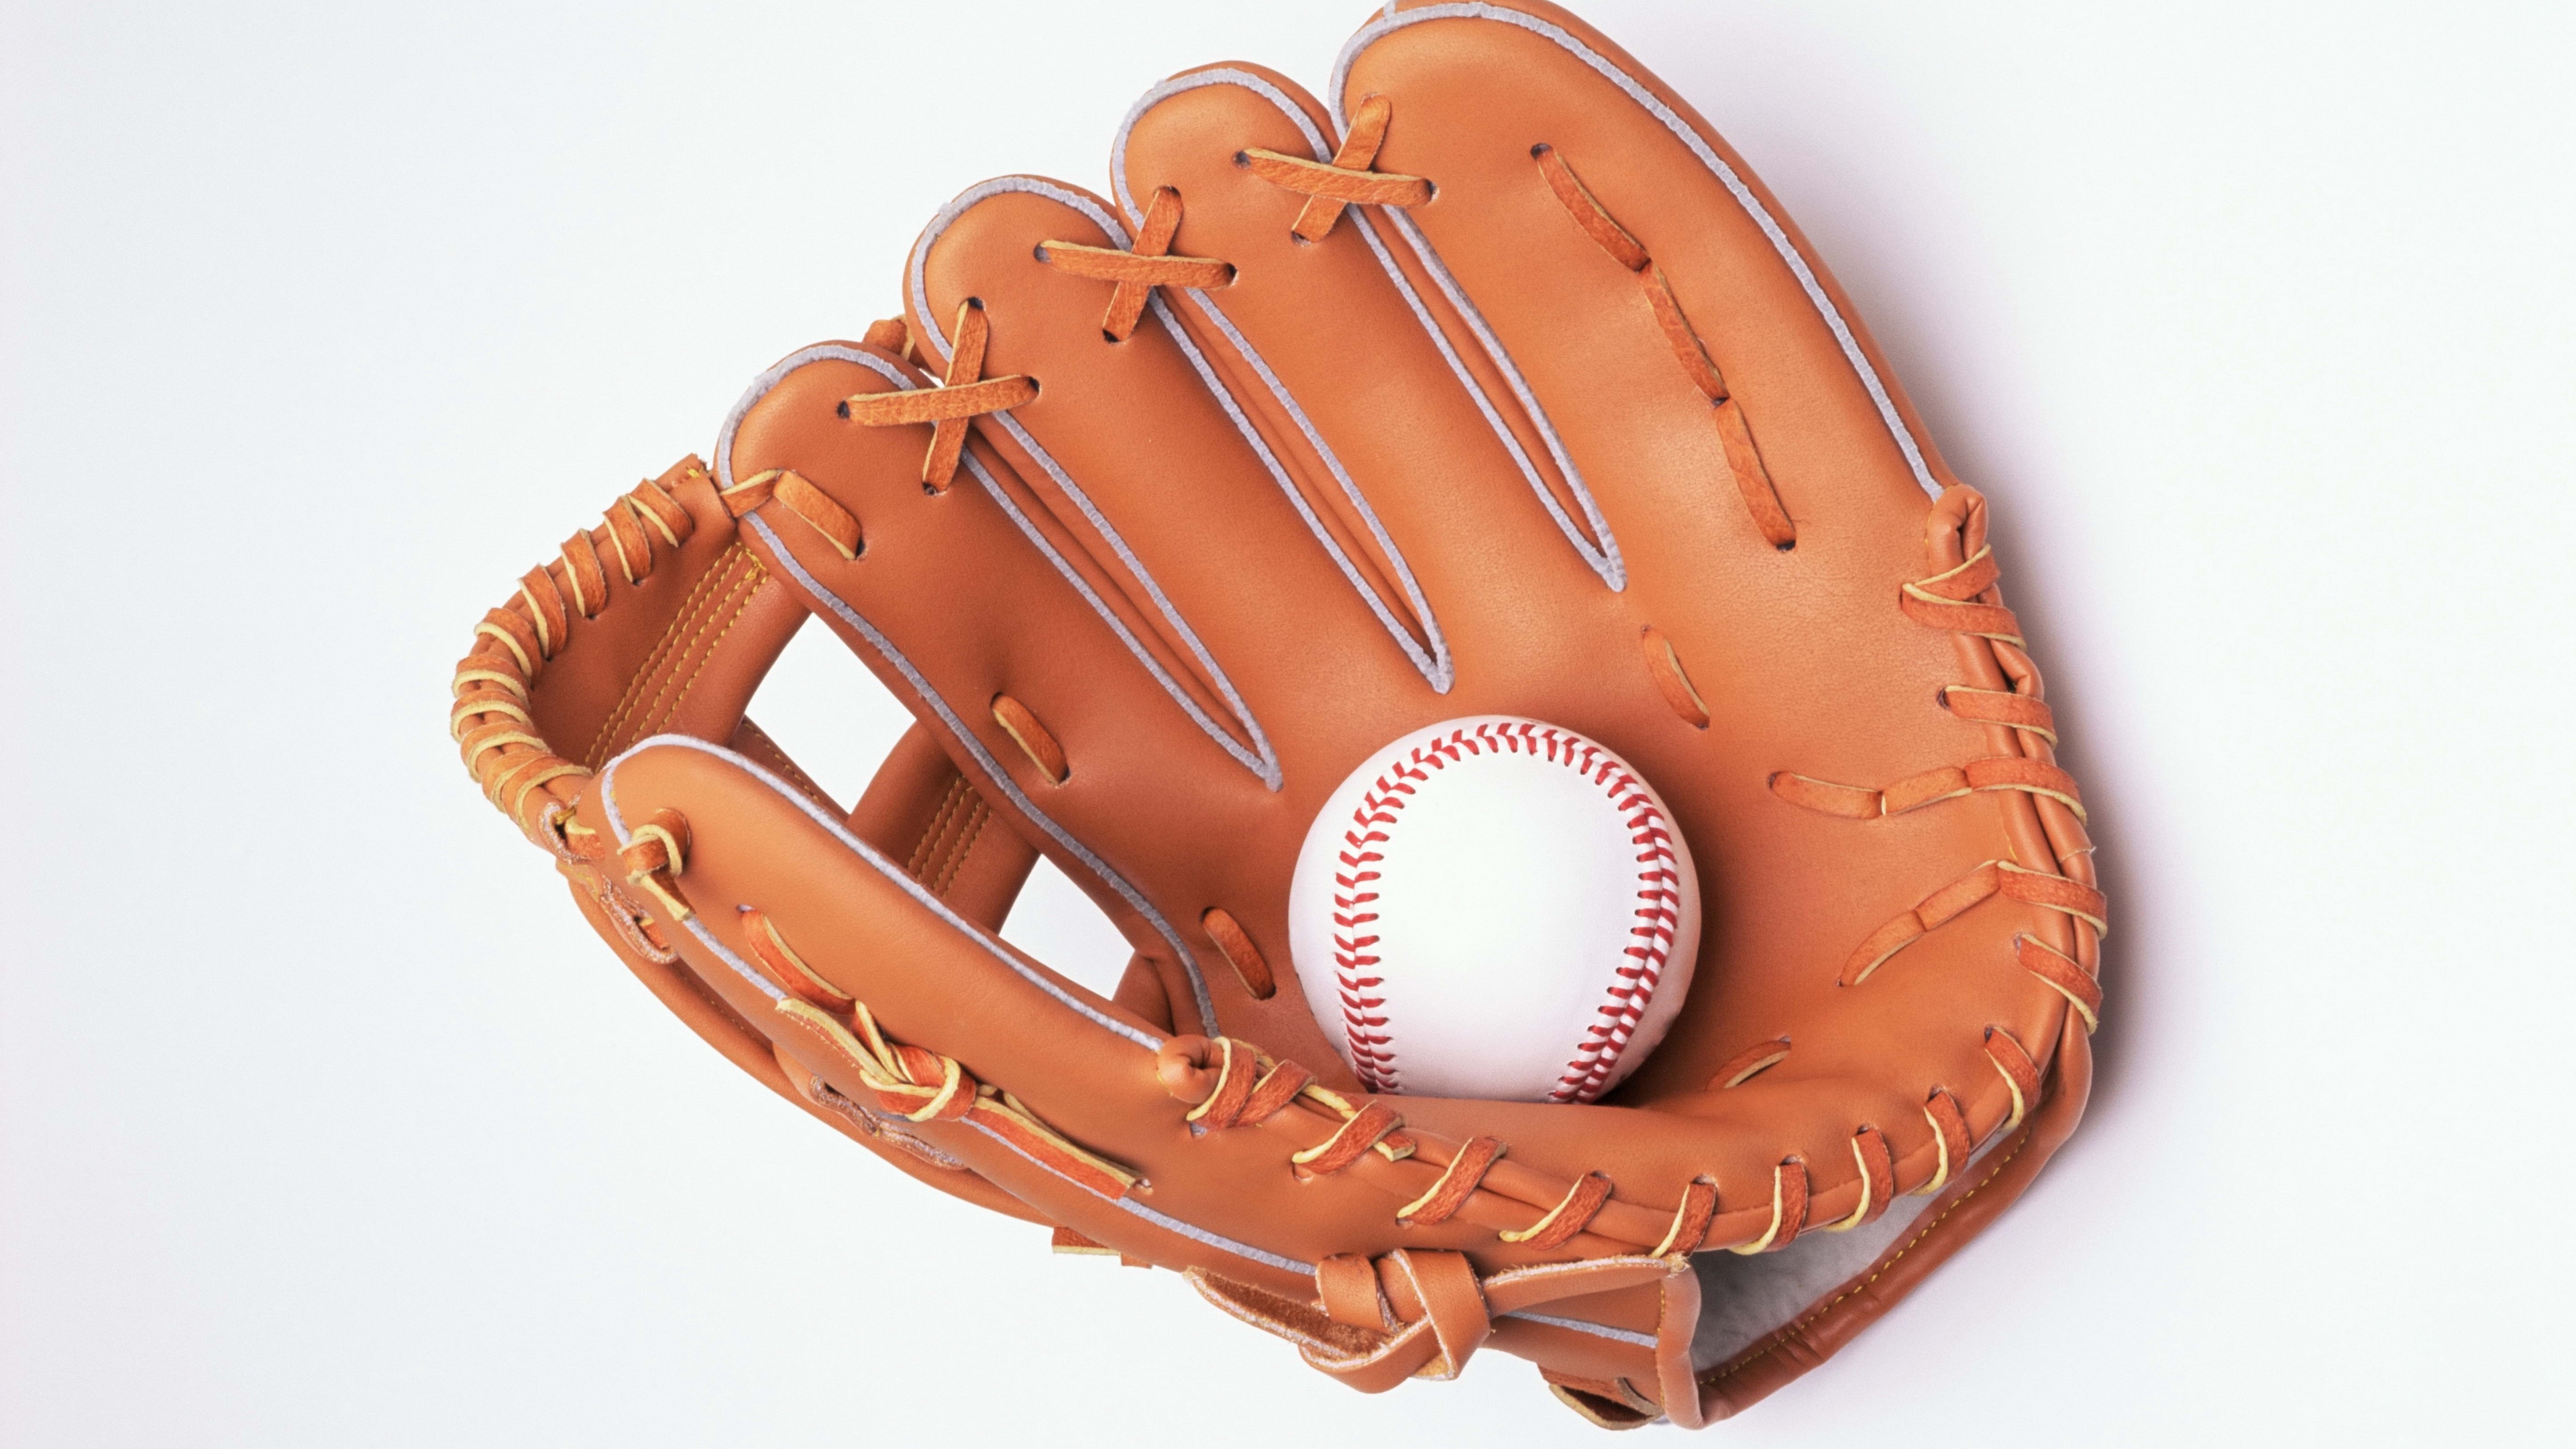 Download wallpapers baseball 4k bit glove ball for desktop with  resolution 3840x2400 High Quality HD pictures wallpapers